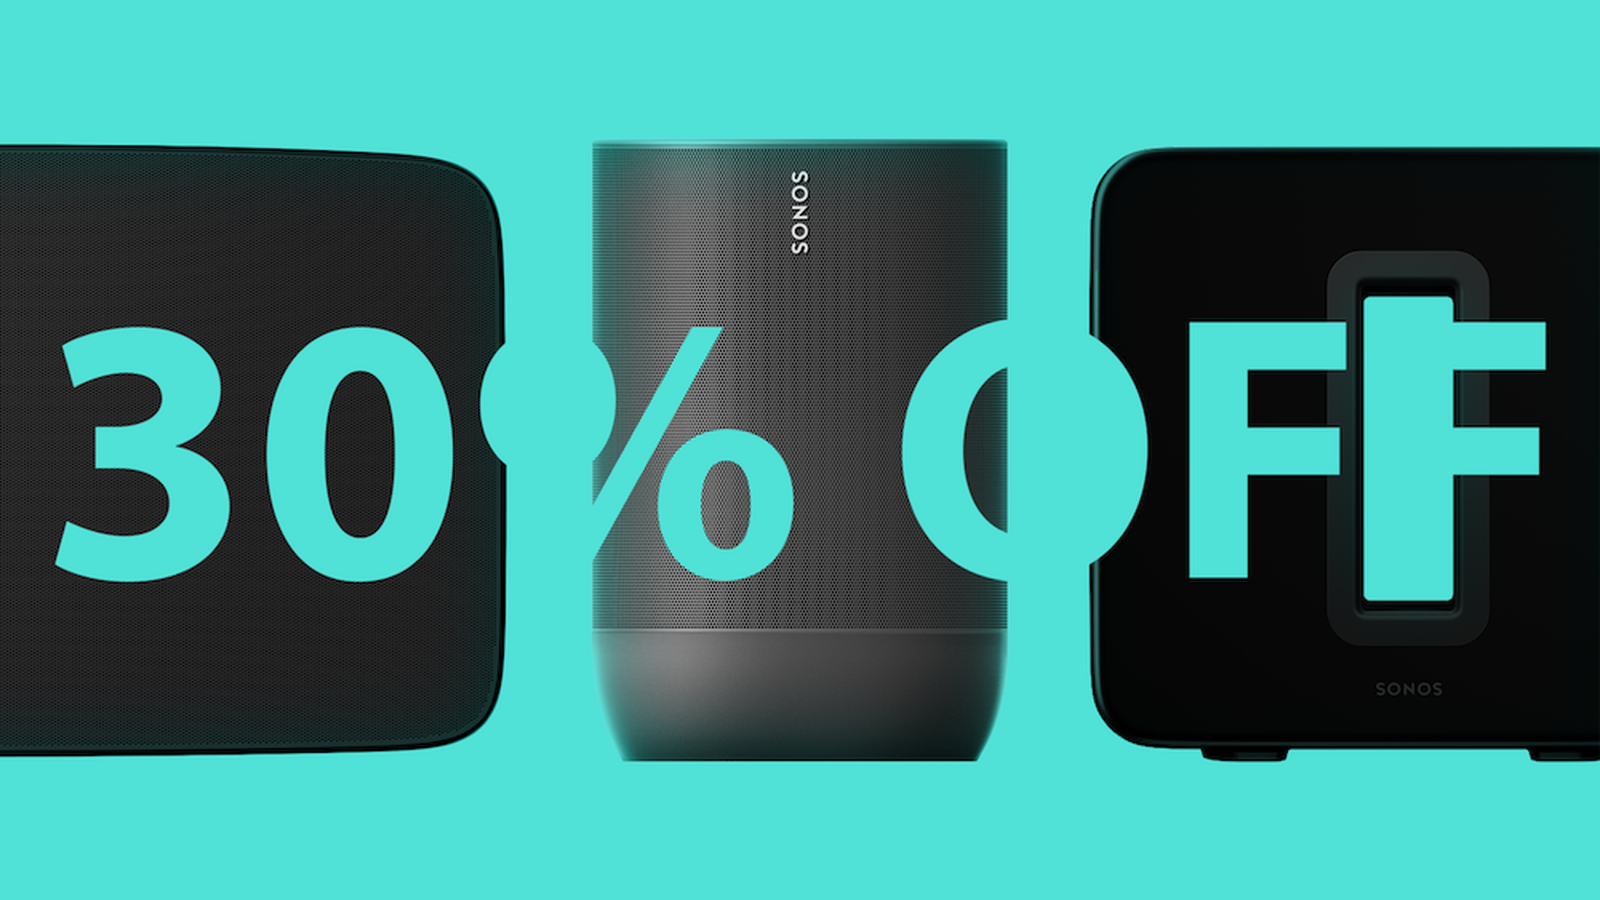 Deals: Sonos Offers 30% Off Sitewide for Healthcare Workers Amazon Discounts iPhone Cases -